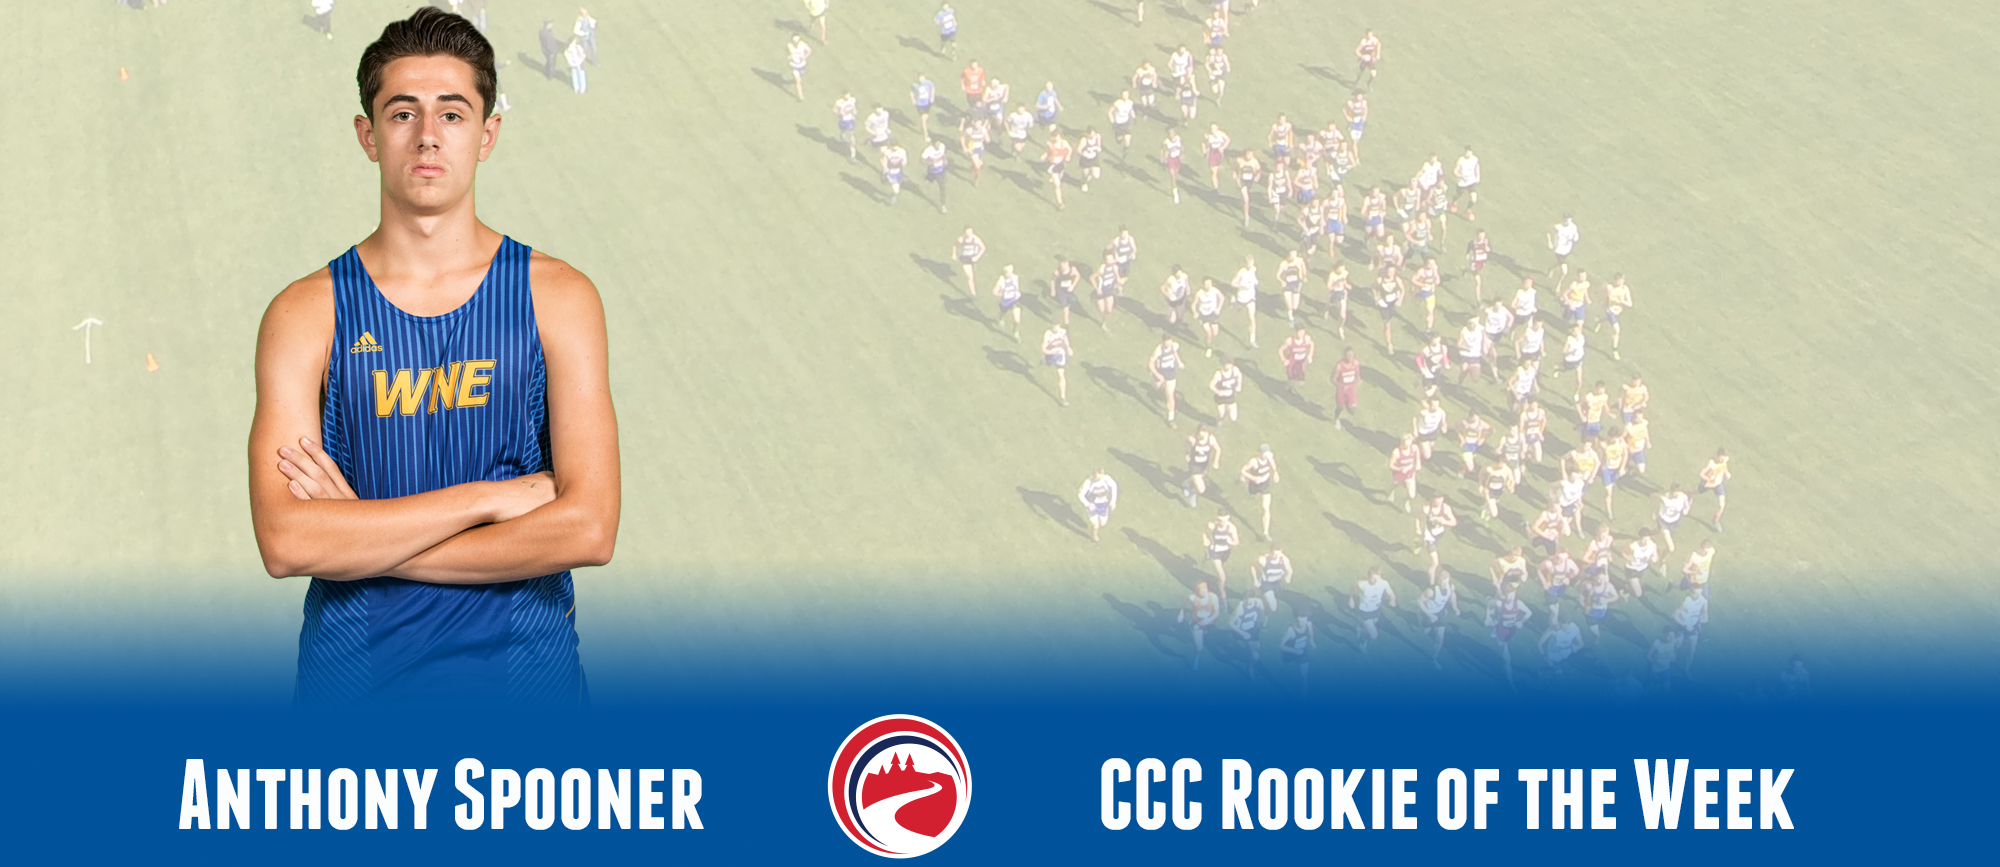 Anthony Spooner Recognized as CCC Rookie of the Week